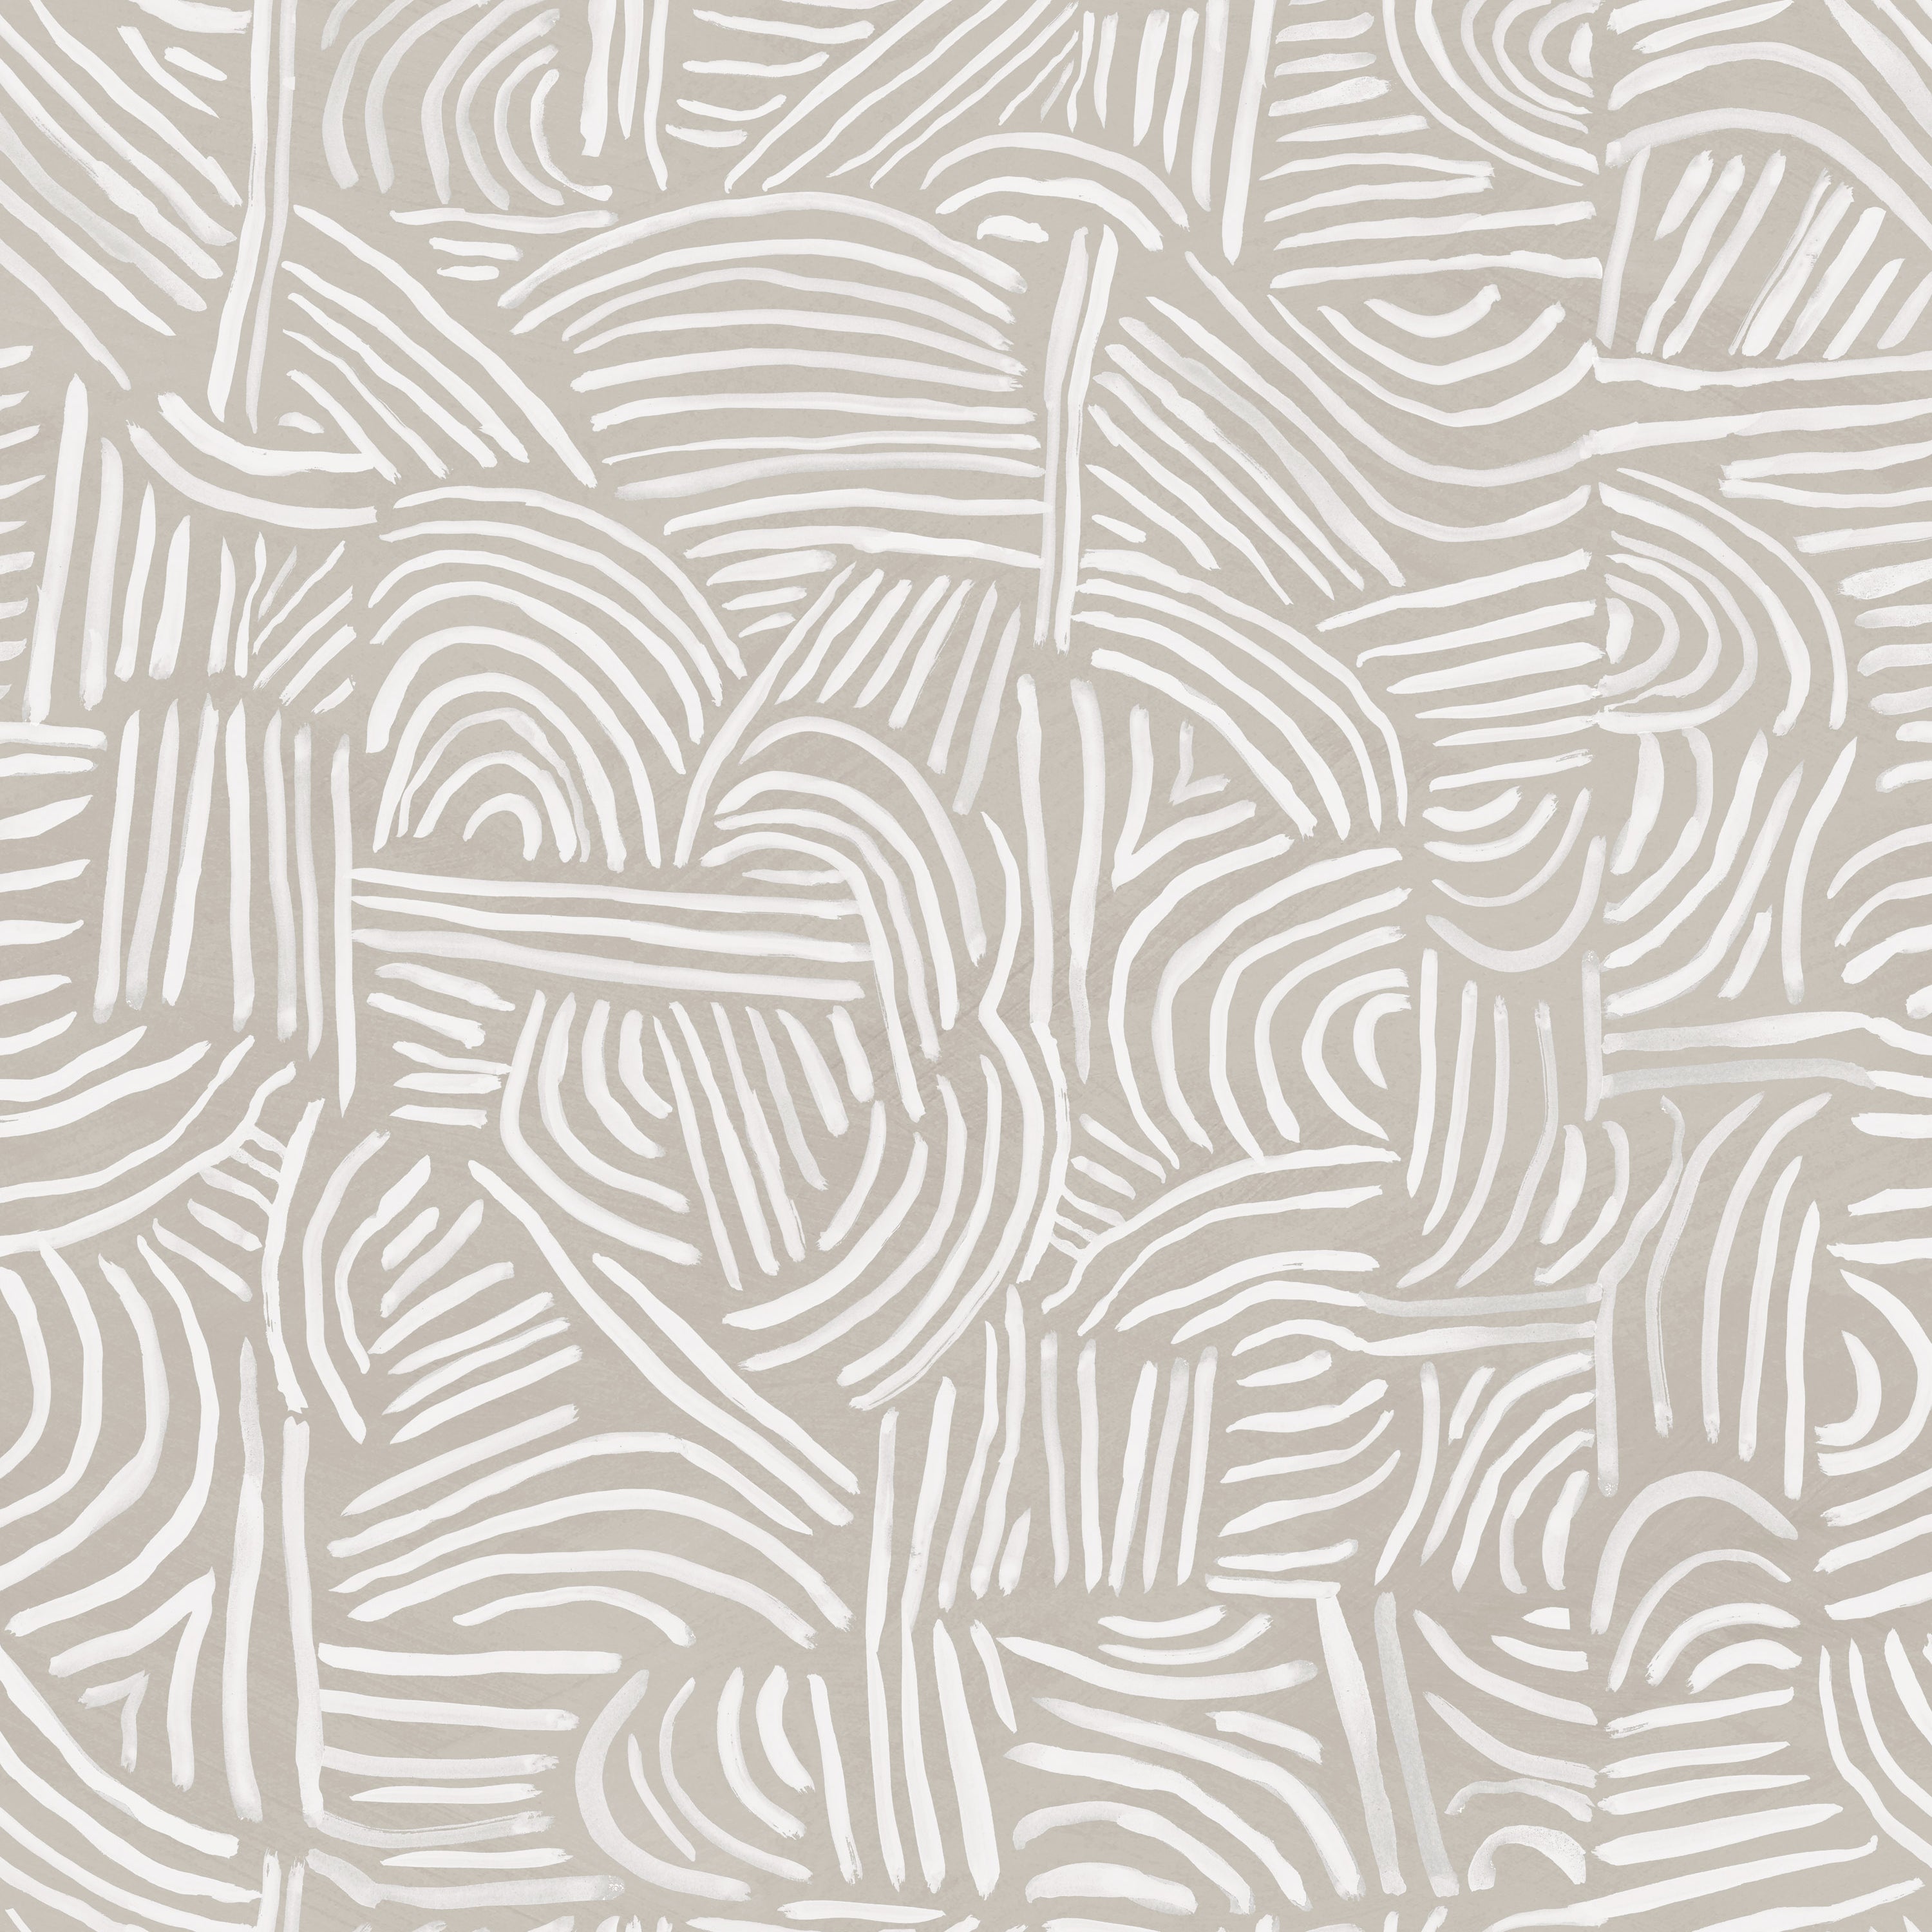 Detail of fabric in an abstract linear print in white on a cream field.